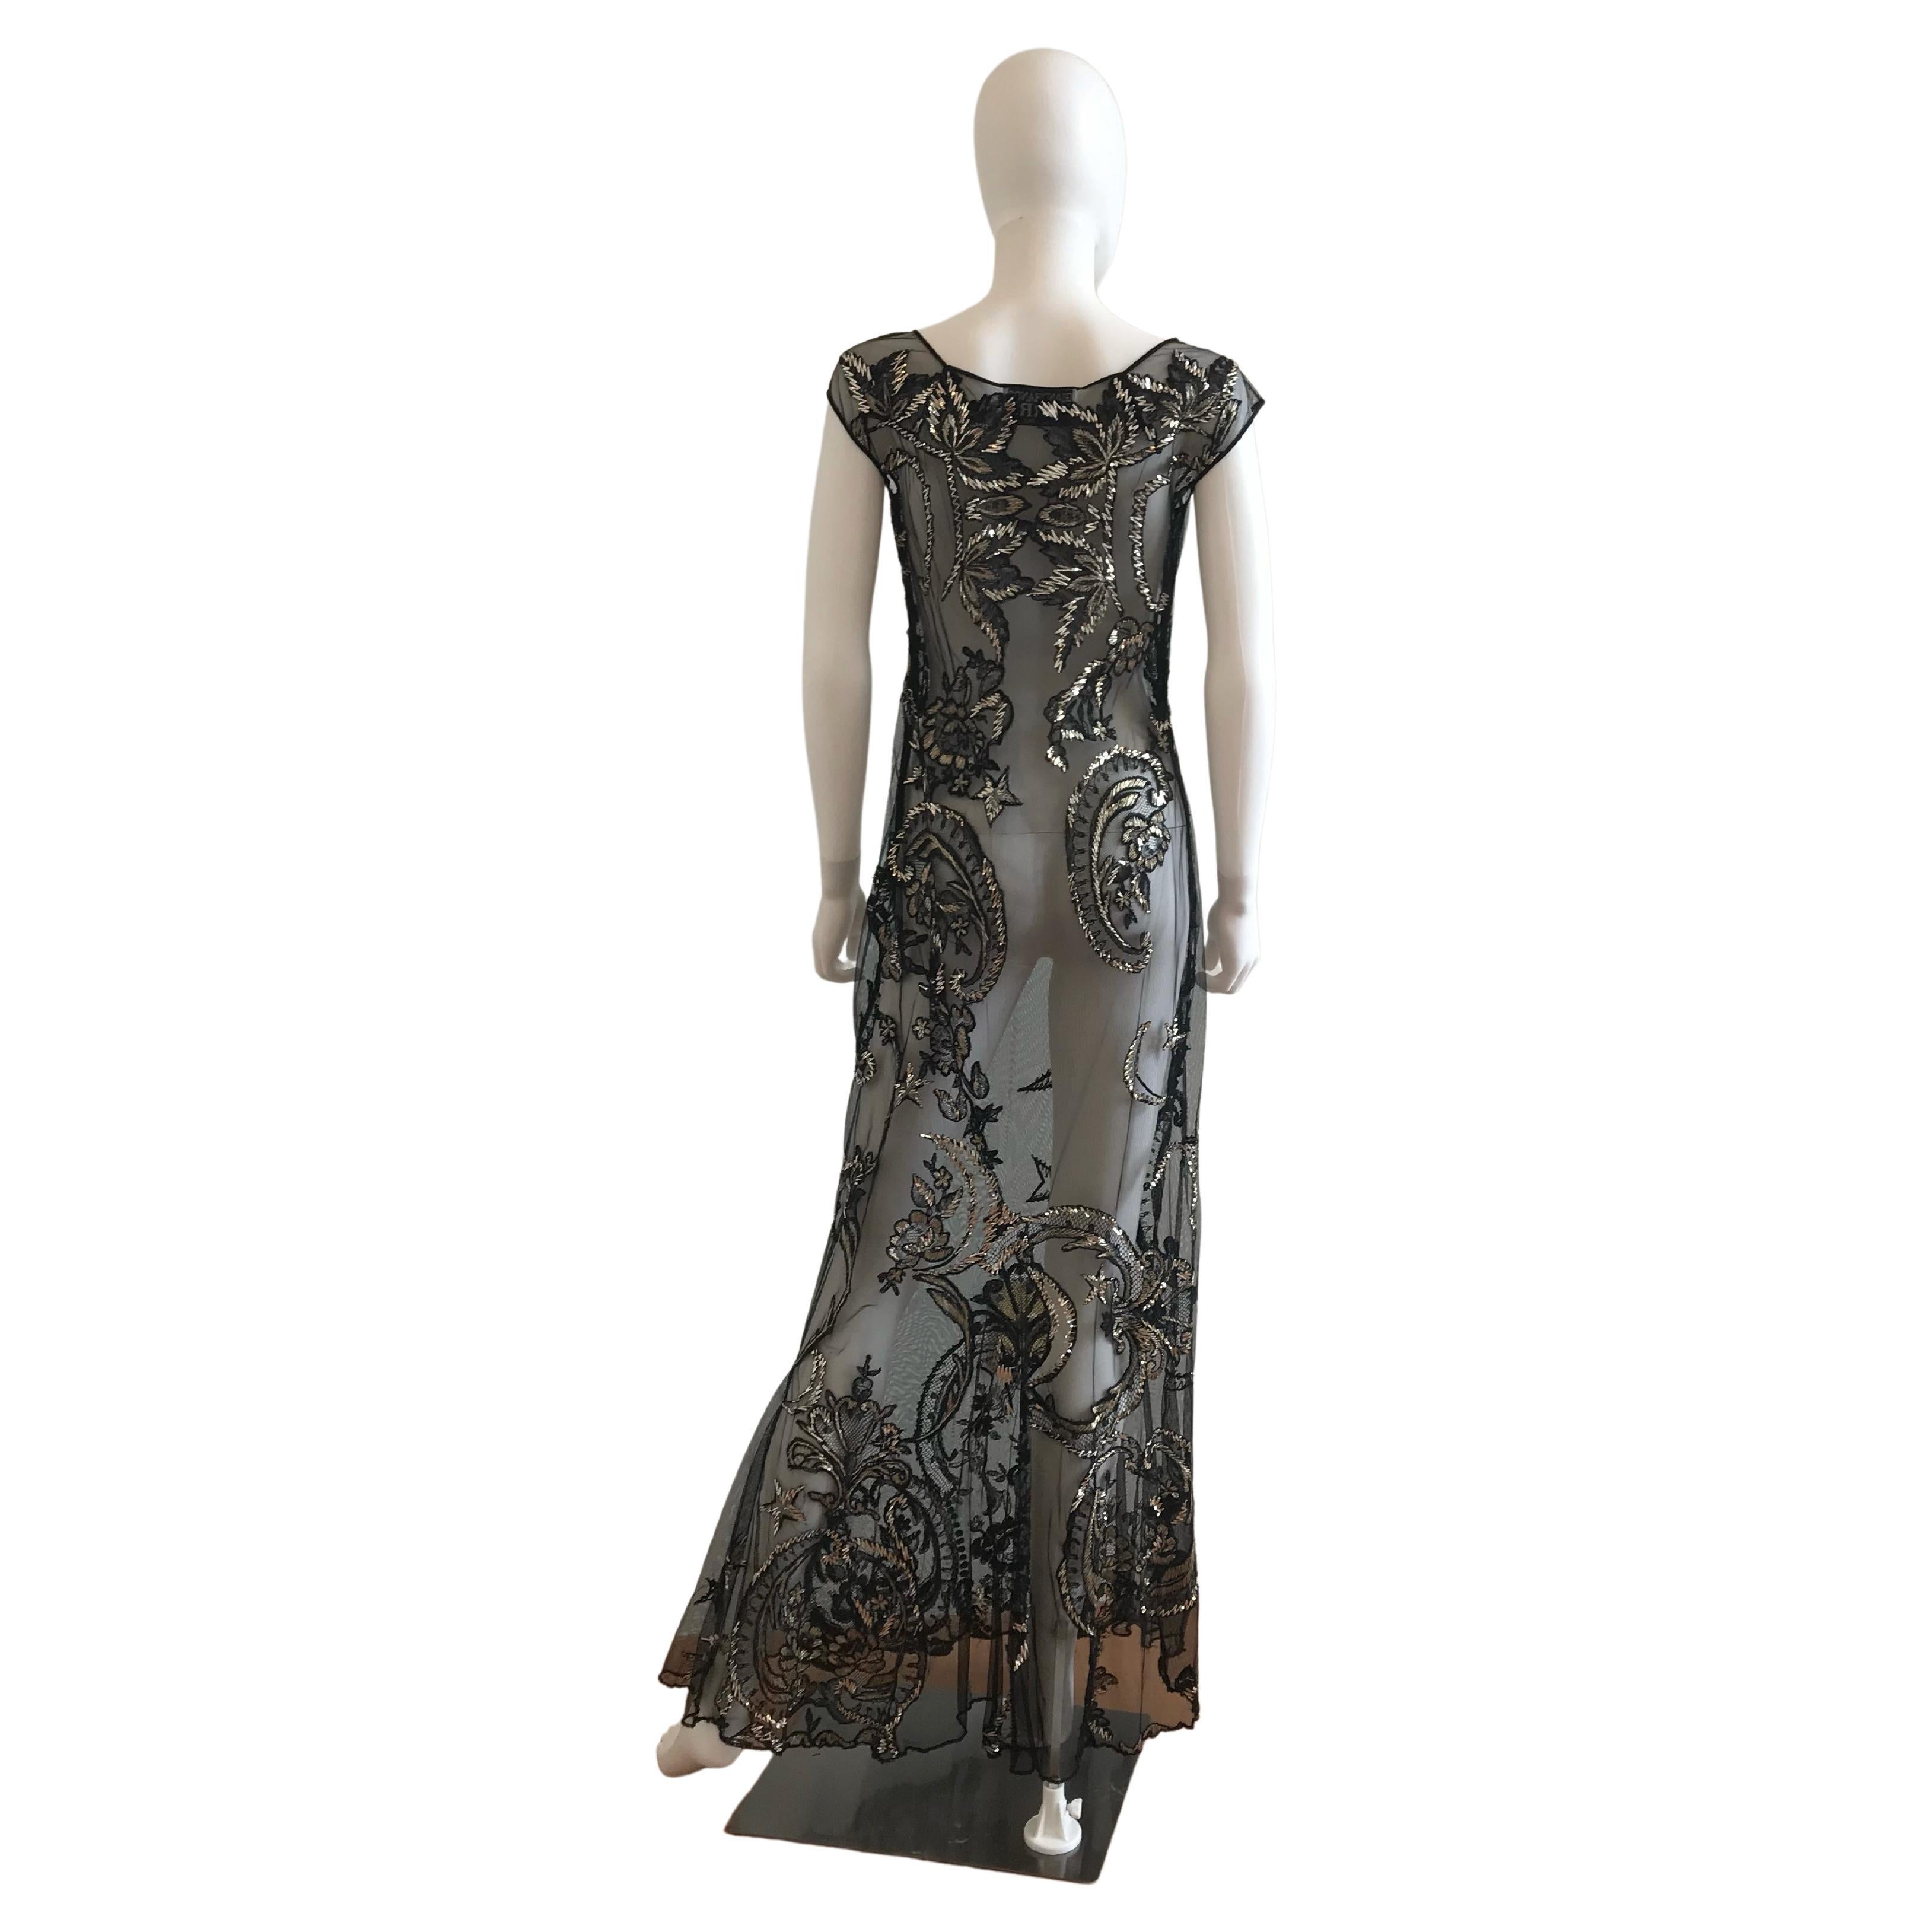 FW 1998 Gianfranco Ferre Metallic Embroidered Tulle Evening Gown For Sale 6